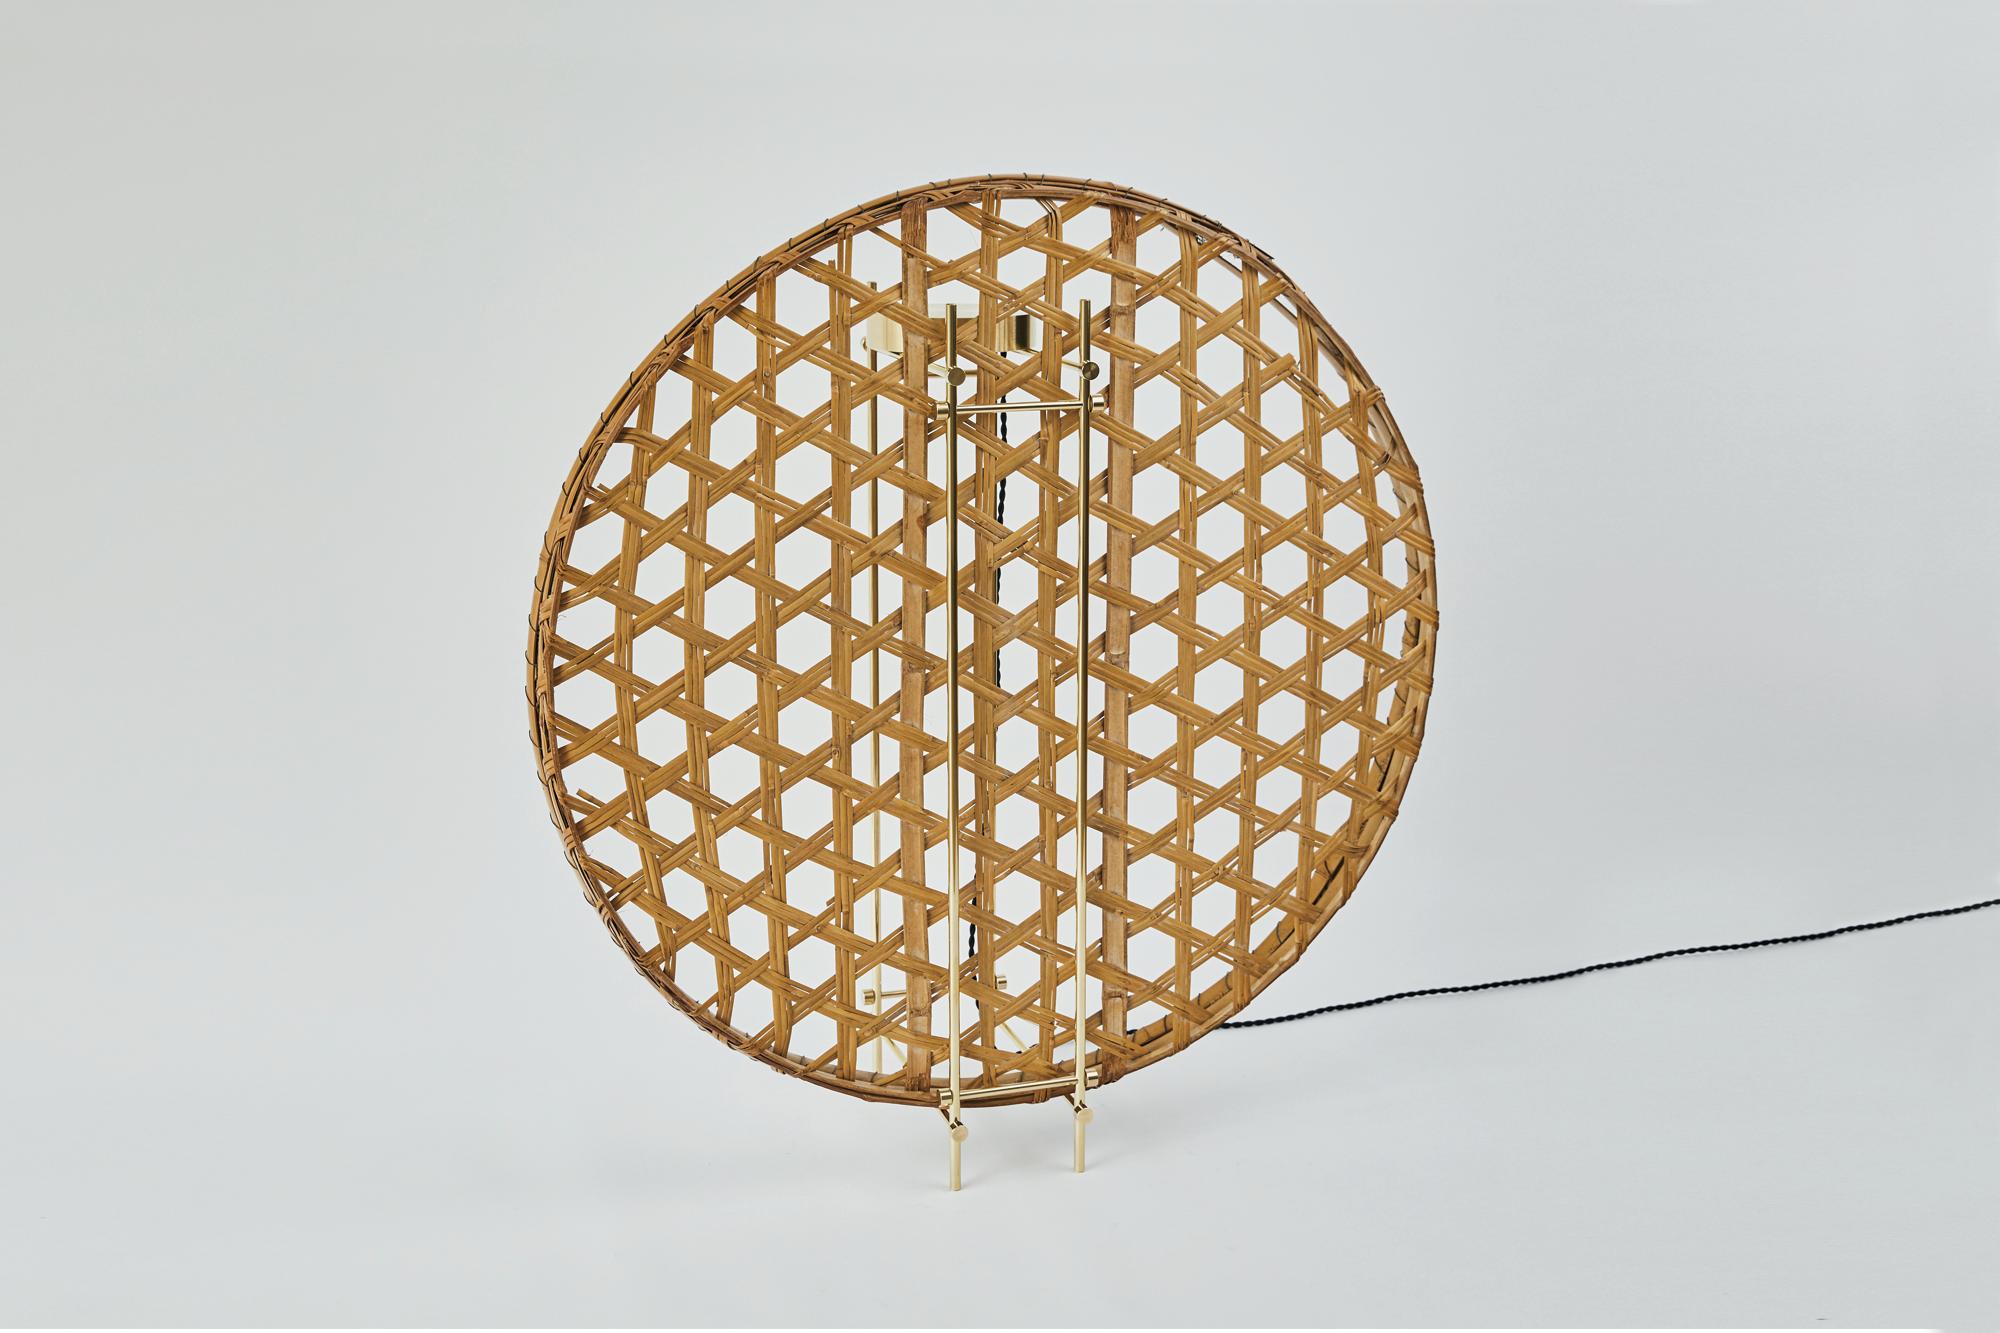 Lamp designed by Ryosuke Harashima.
This work is made of antique Japanese bamboo basket and brass.
Artist creates new style lamp by combining old tool which is never used now and Industrial materials. It has both contemporary feeling and folk craft